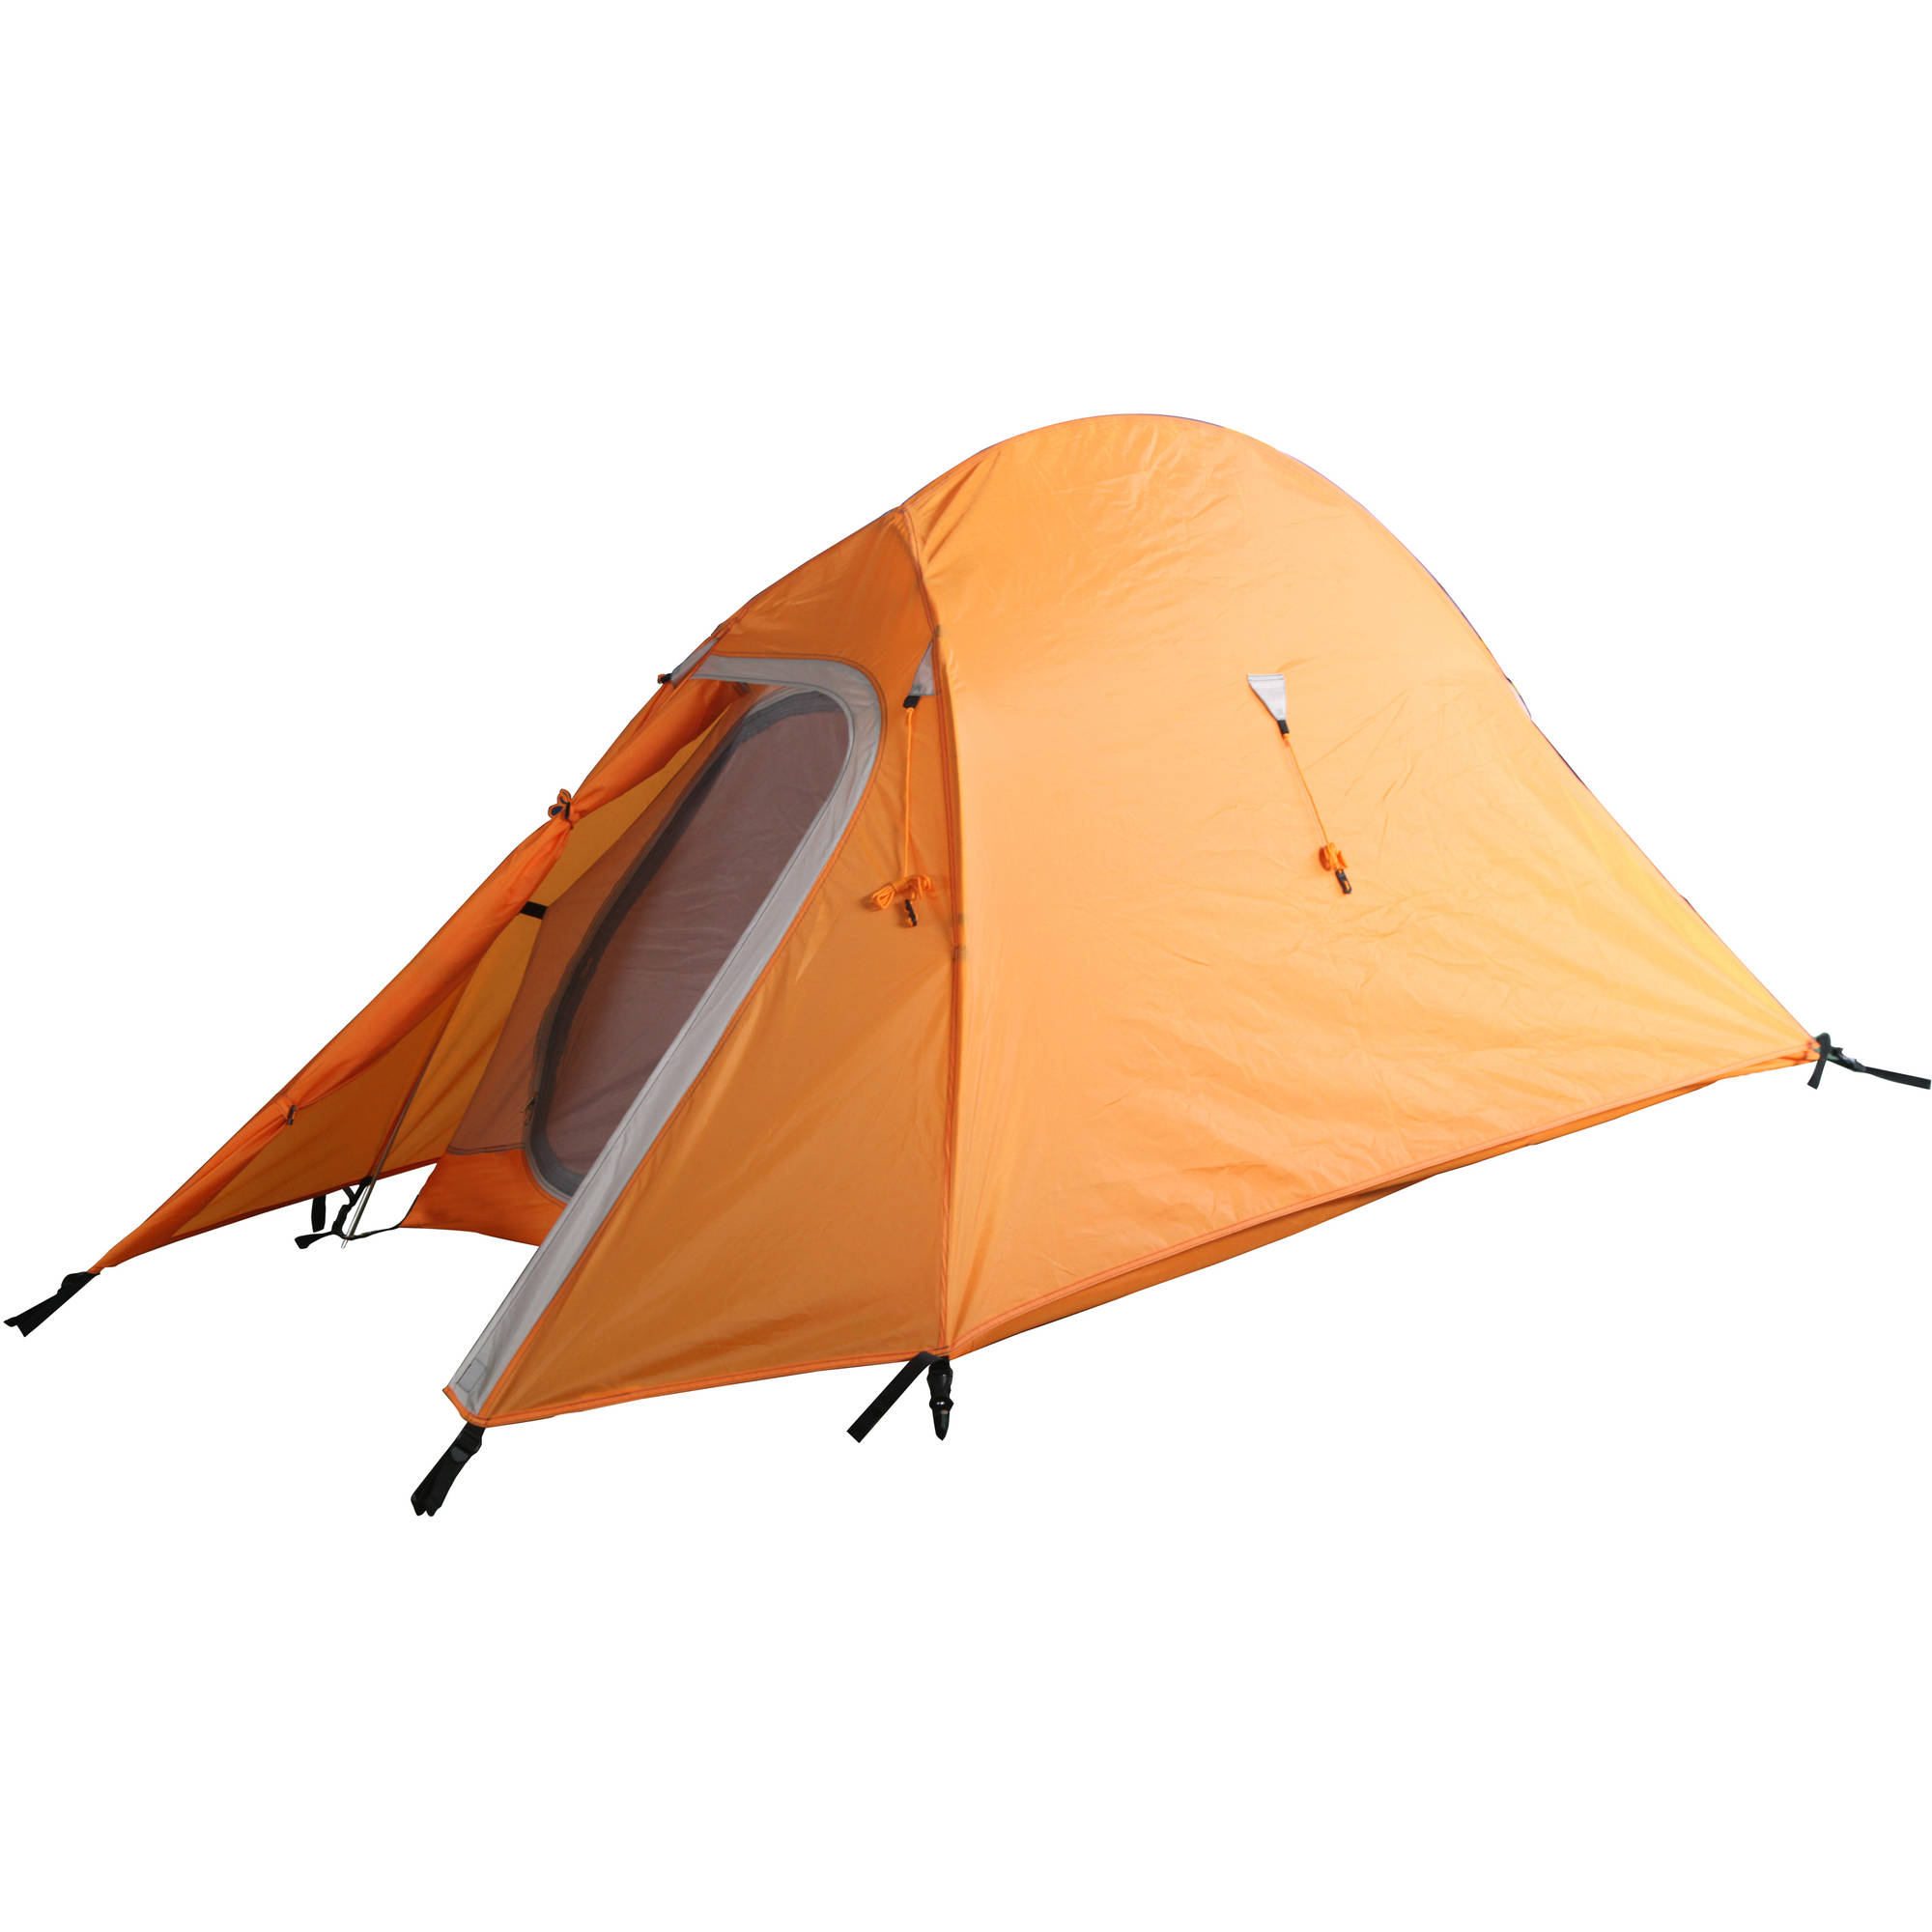 Ozark Trail Ultra Light Outdoor Back Packing 4' x 7' x 6'5" One-Room Tent, Orange - image 1 of 10